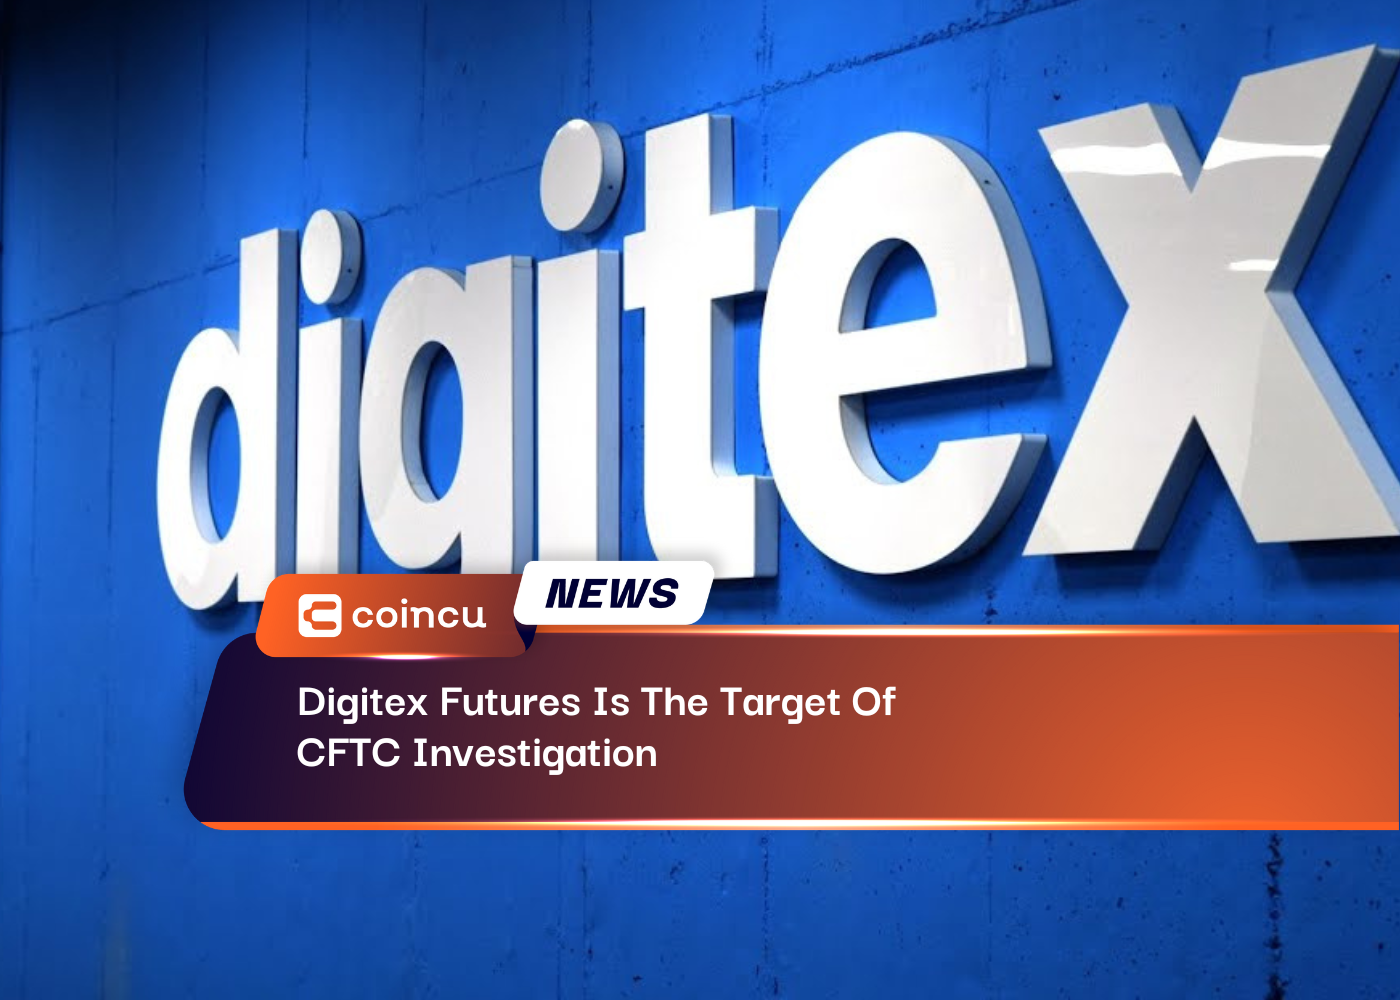 Digitex Futures Is The Target Of